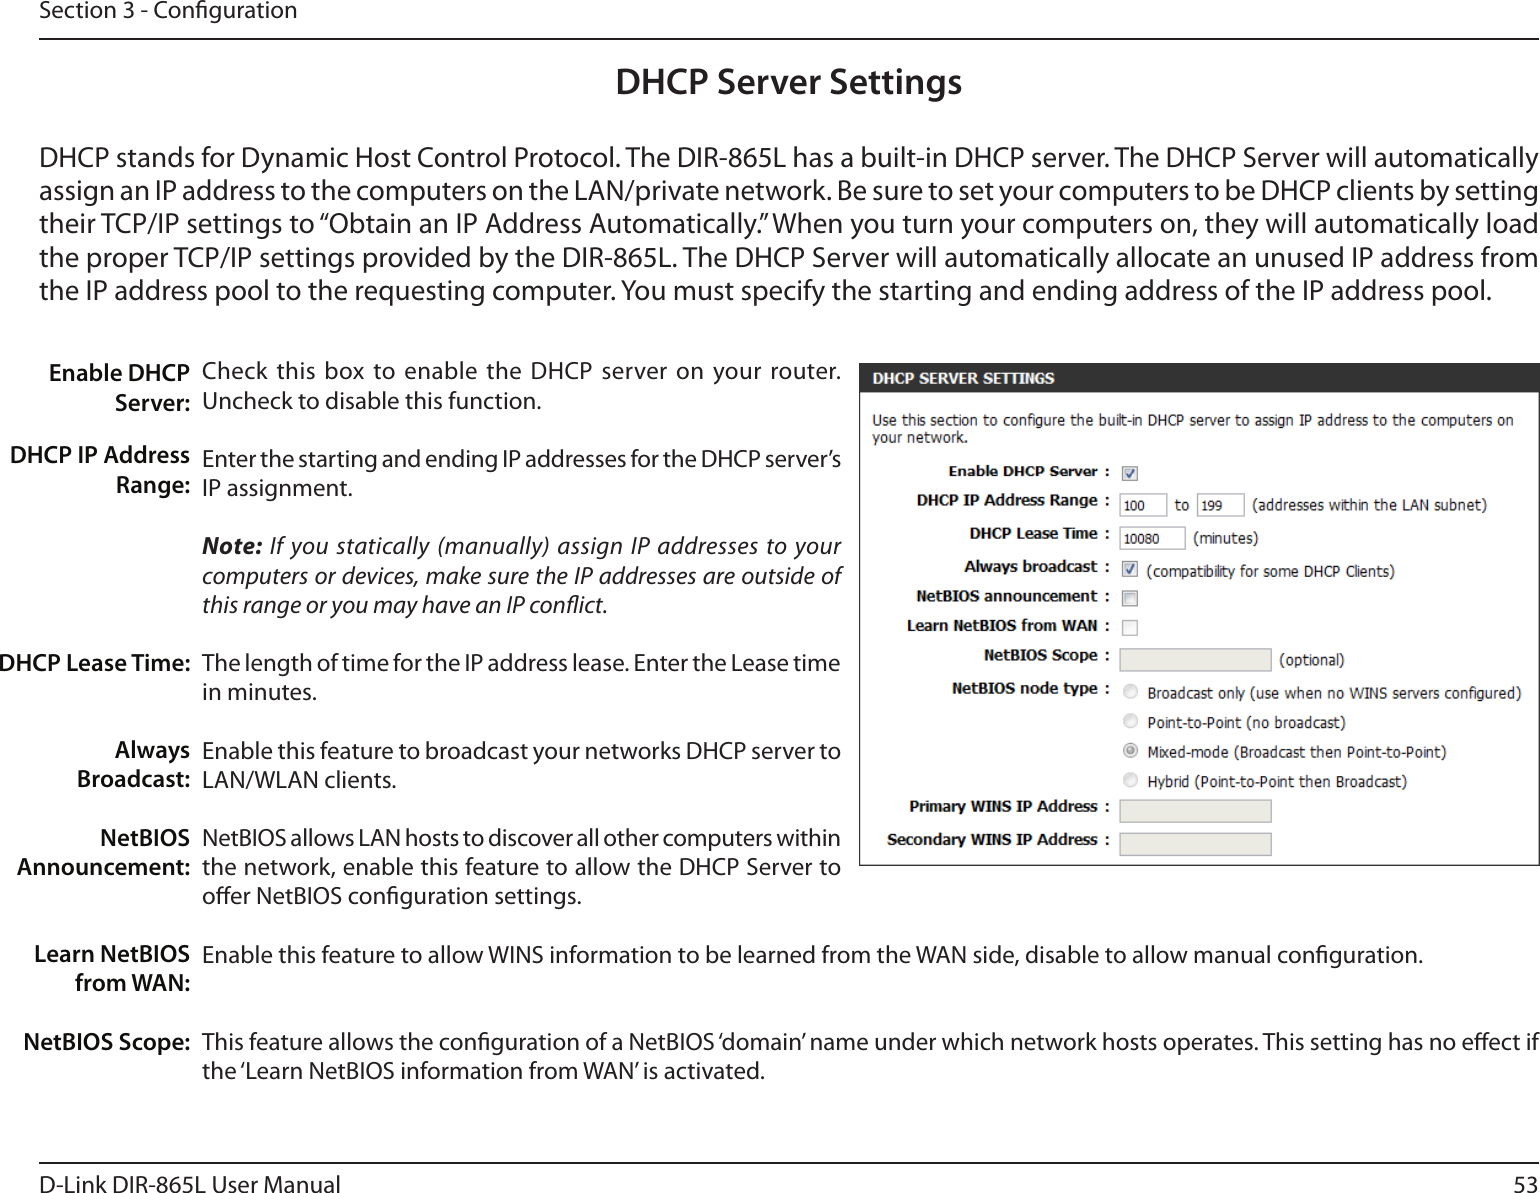 53D-Link DIR-865L User ManualSection 3 - CongurationDHCP Server SettingsDHCP stands for Dynamic Host Control Protocol. The DIR-865L has a built-in DHCP server. The DHCP Server will automatically assign an IP address to the computers on the LAN/private network. Be sure to set your computers to be DHCP clients by setting their TCP/IP settings to “Obtain an IP Address Automatically.” When you turn your computers on, they will automatically load the proper TCP/IP settings provided by the DIR-865L. The DHCP Server will automatically allocate an unused IP address from the IP address pool to the requesting computer. You must specify the starting and ending address of the IP address pool.Check this  box to enable the DHCP  server on your router. Uncheck to disable this function.Enter the starting and ending IP addresses for the DHCP server’s IP assignment.Note: If you statically (manually) assign IP addresses to your computers or devices, make sure the IP addresses are outside of this range or you may have an IP conict. The length of time for the IP address lease. Enter the Lease time in minutes.Enable this feature to broadcast your networks DHCP server to LAN/WLAN clients.NetBIOS allows LAN hosts to discover all other computers within the network, enable this feature to allow the DHCP Server to oer NetBIOS conguration settings.Enable this feature to allow WINS information to be learned from the WAN side, disable to allow manual conguration.This feature allows the conguration of a NetBIOS ‘domain’ name under which network hosts operates. This setting has no eect if the ‘Learn NetBIOS information from WAN’ is activated.Enable DHCP Server:DHCP IP Address Range:DHCP Lease Time:Always Broadcast:NetBIOS Announcement:Learn NetBIOS from WAN:NetBIOS Scope: